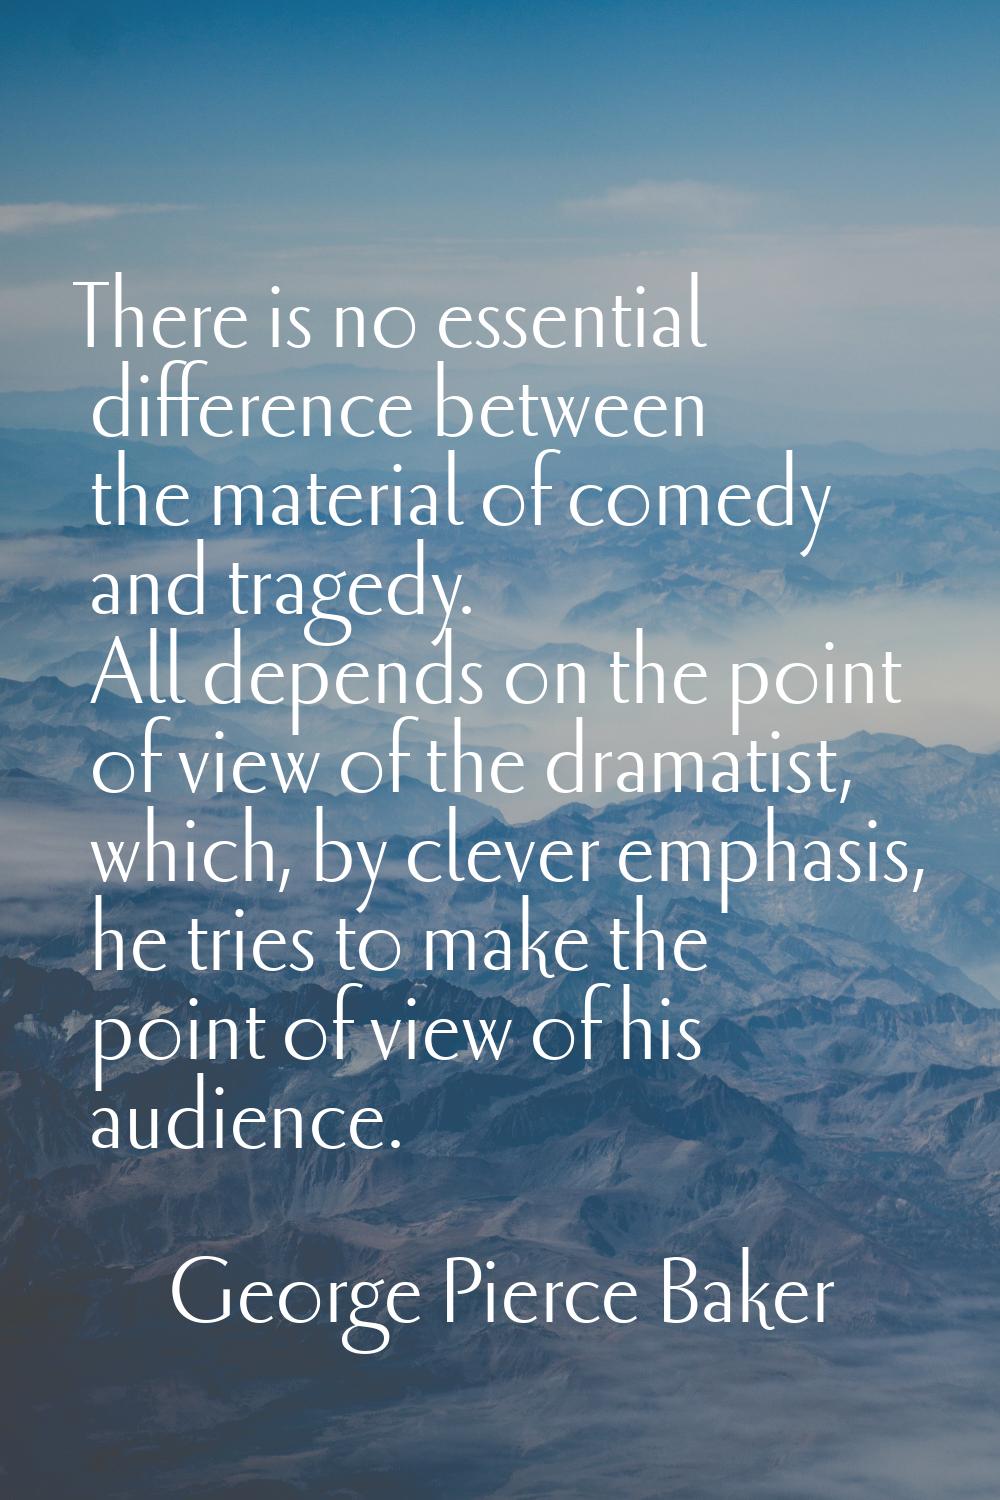 There is no essential difference between the material of comedy and tragedy. All depends on the poi